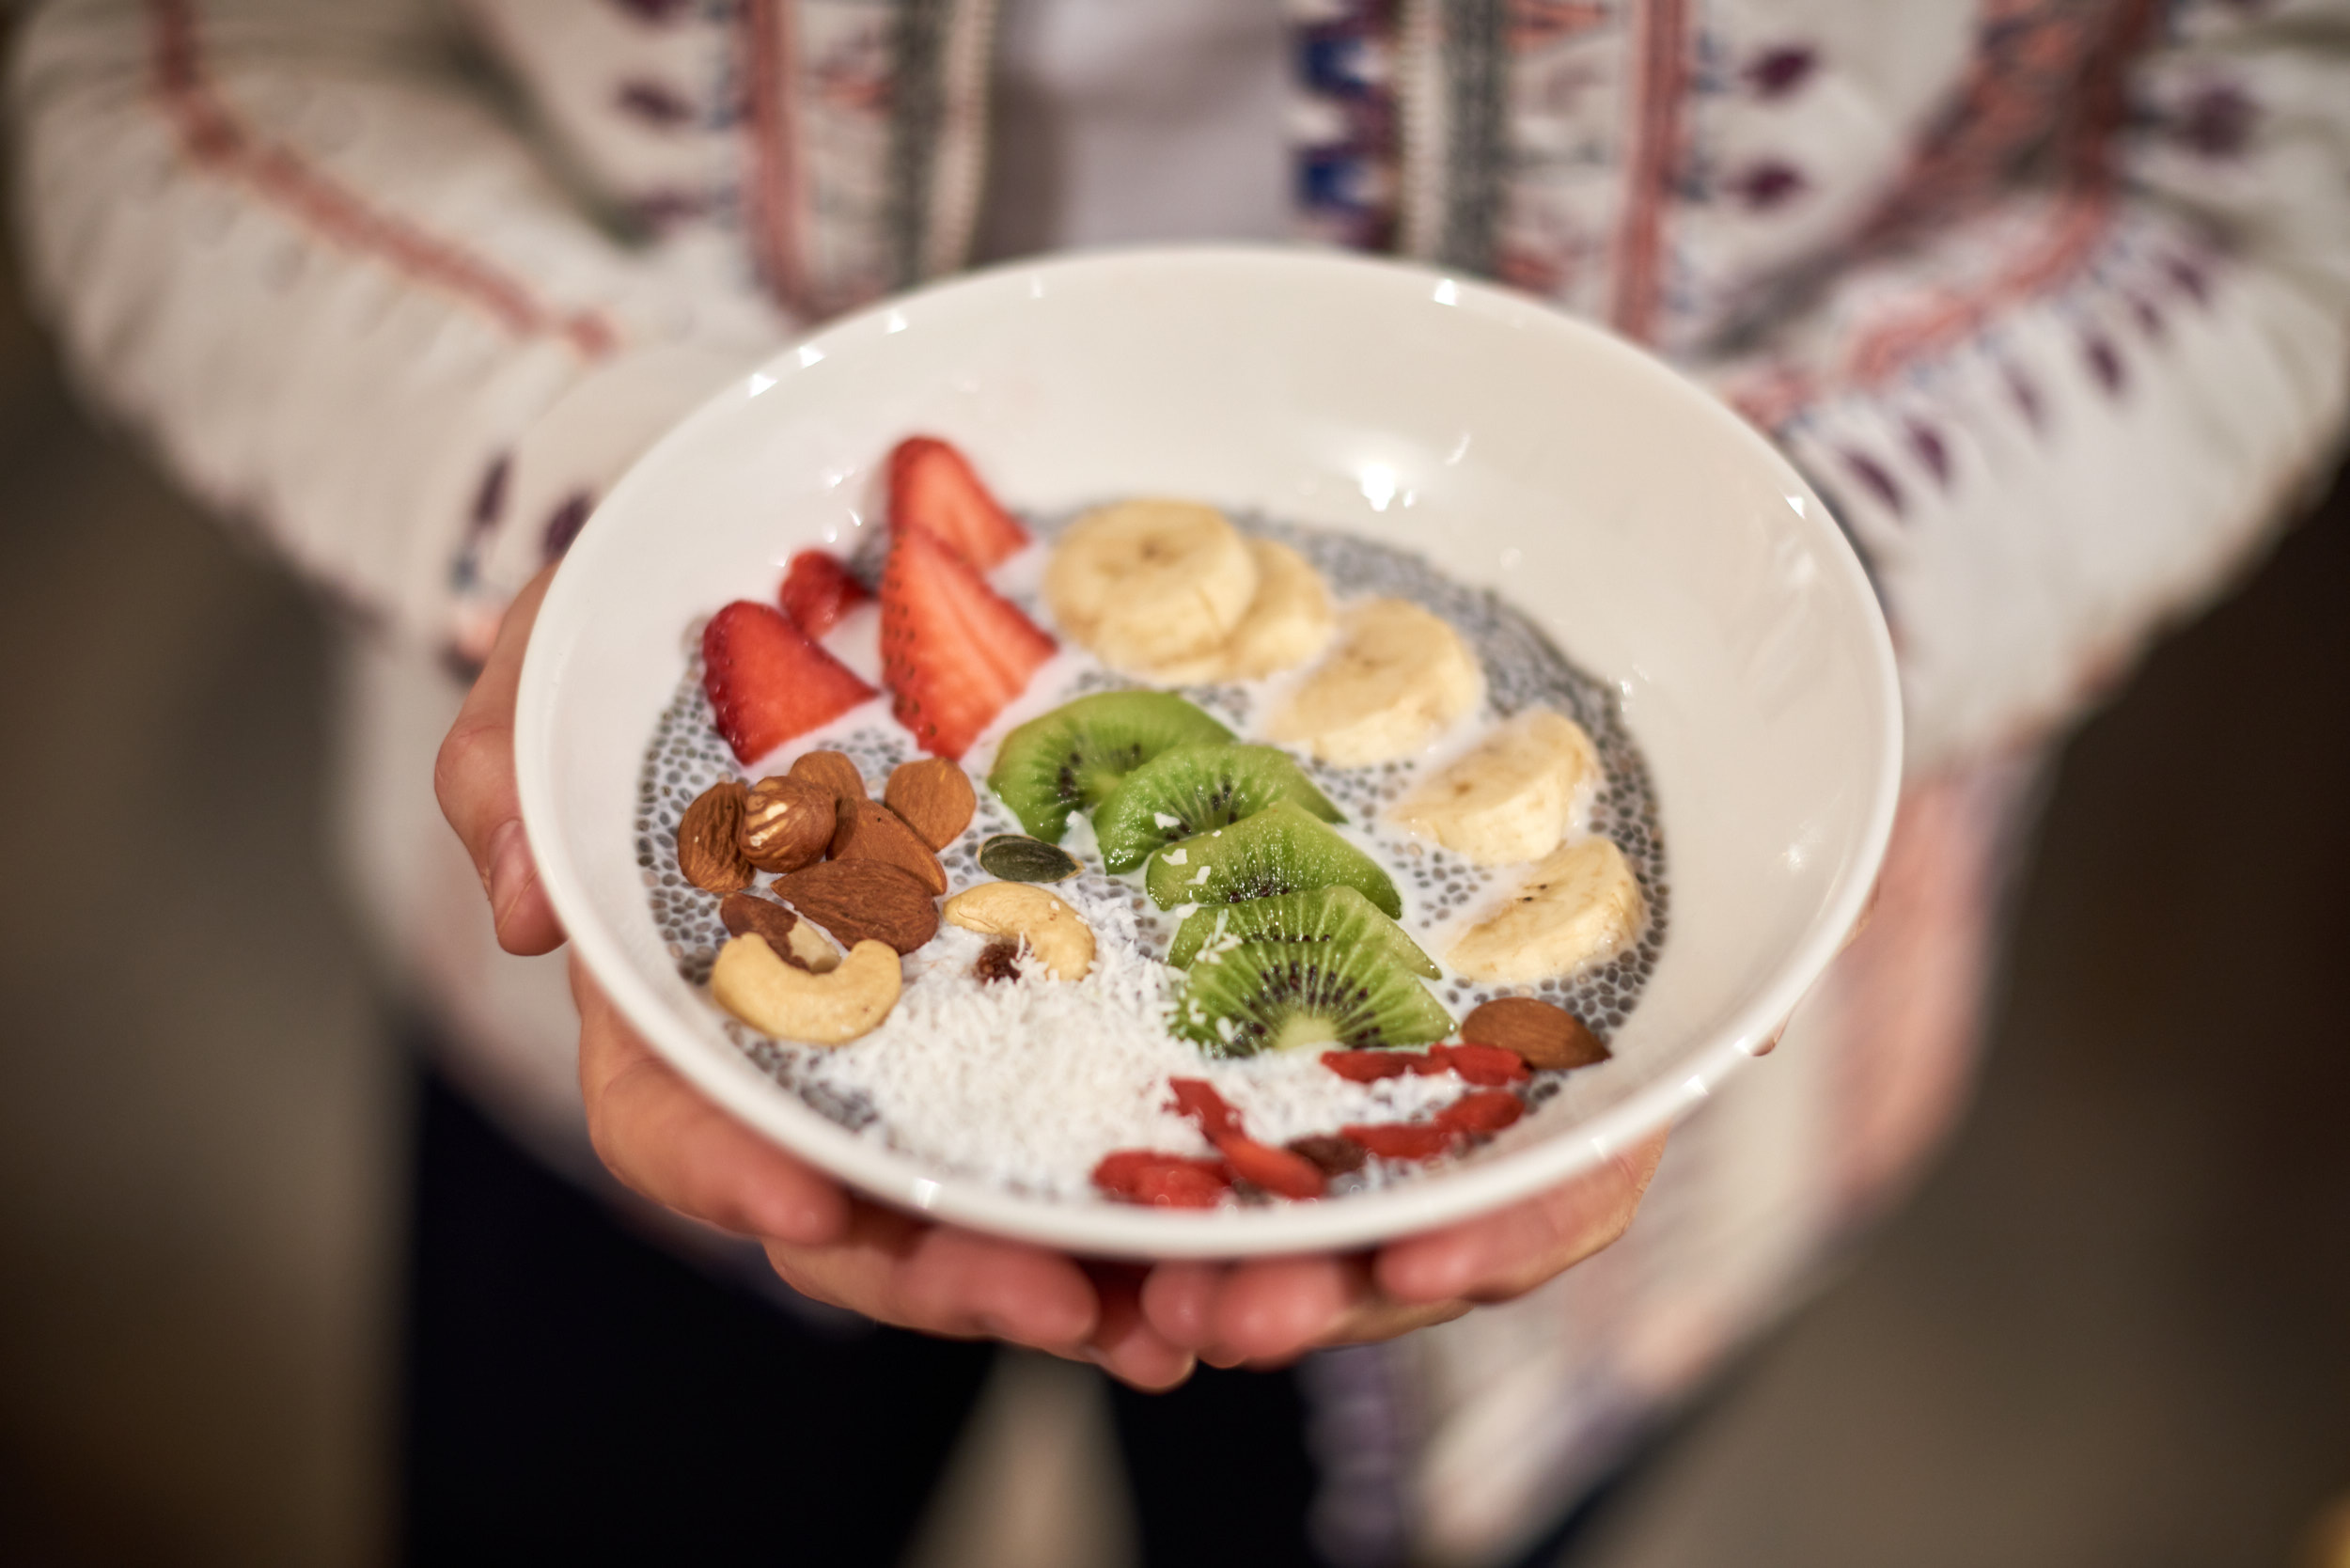 kick-start-your-day-with-this-delicious-chia-bowl-recipe